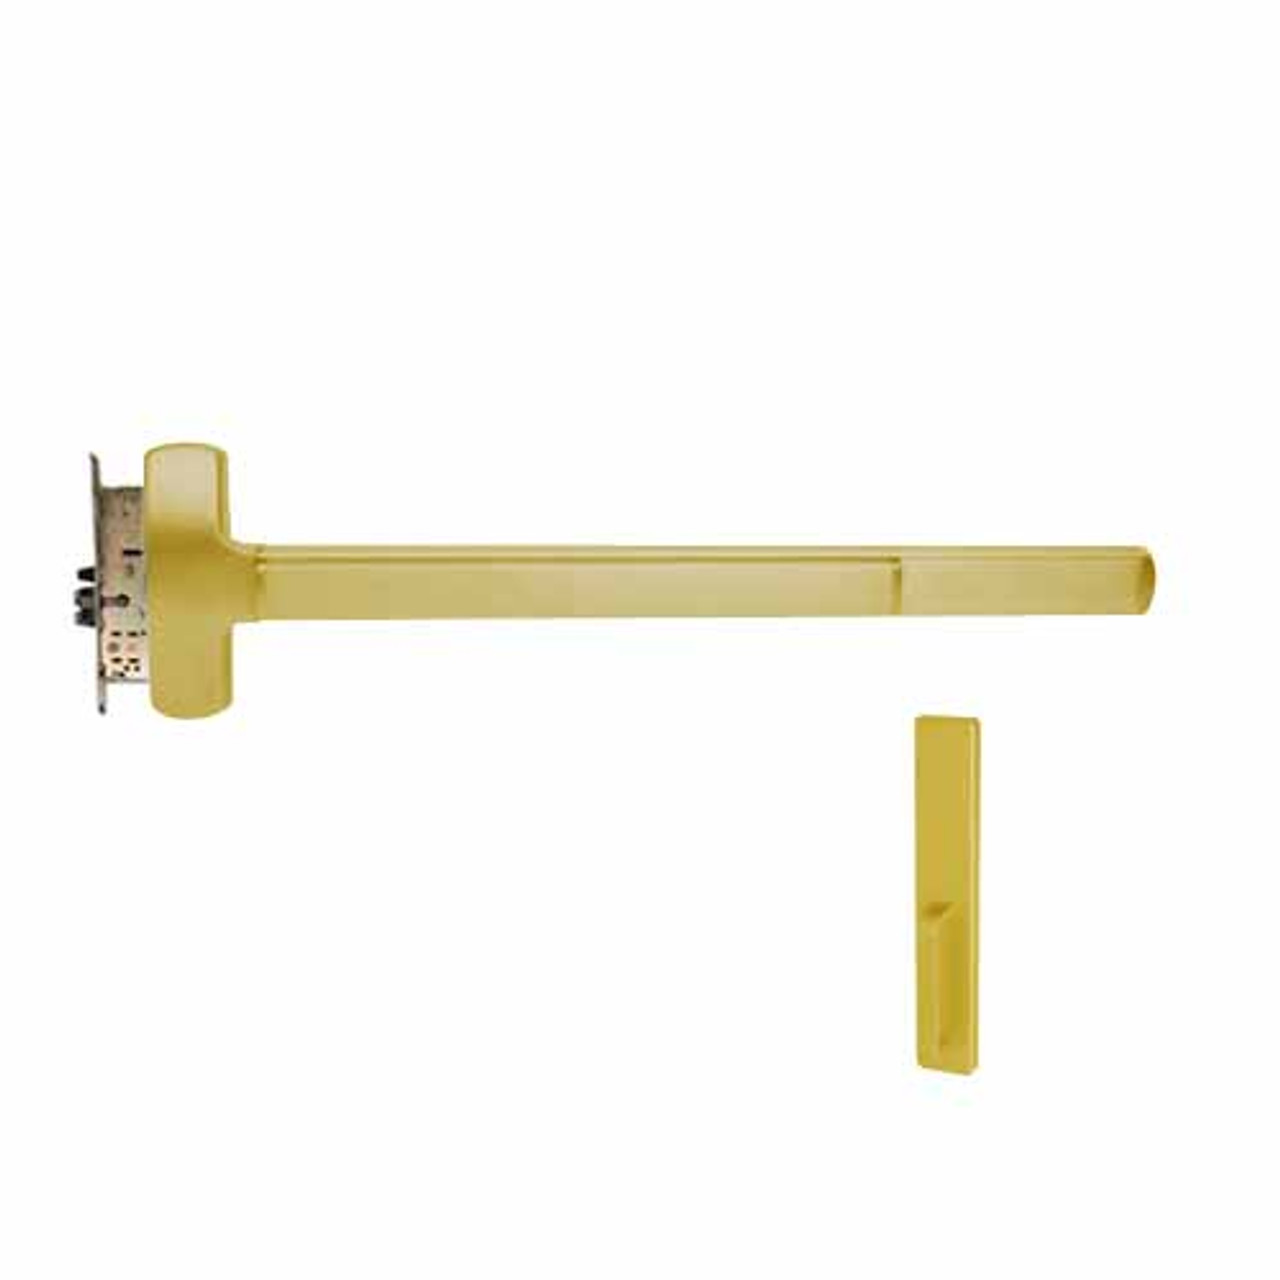 F-25-M-DT-US3-4-LHR Falcon Exit Device in Polished Brass